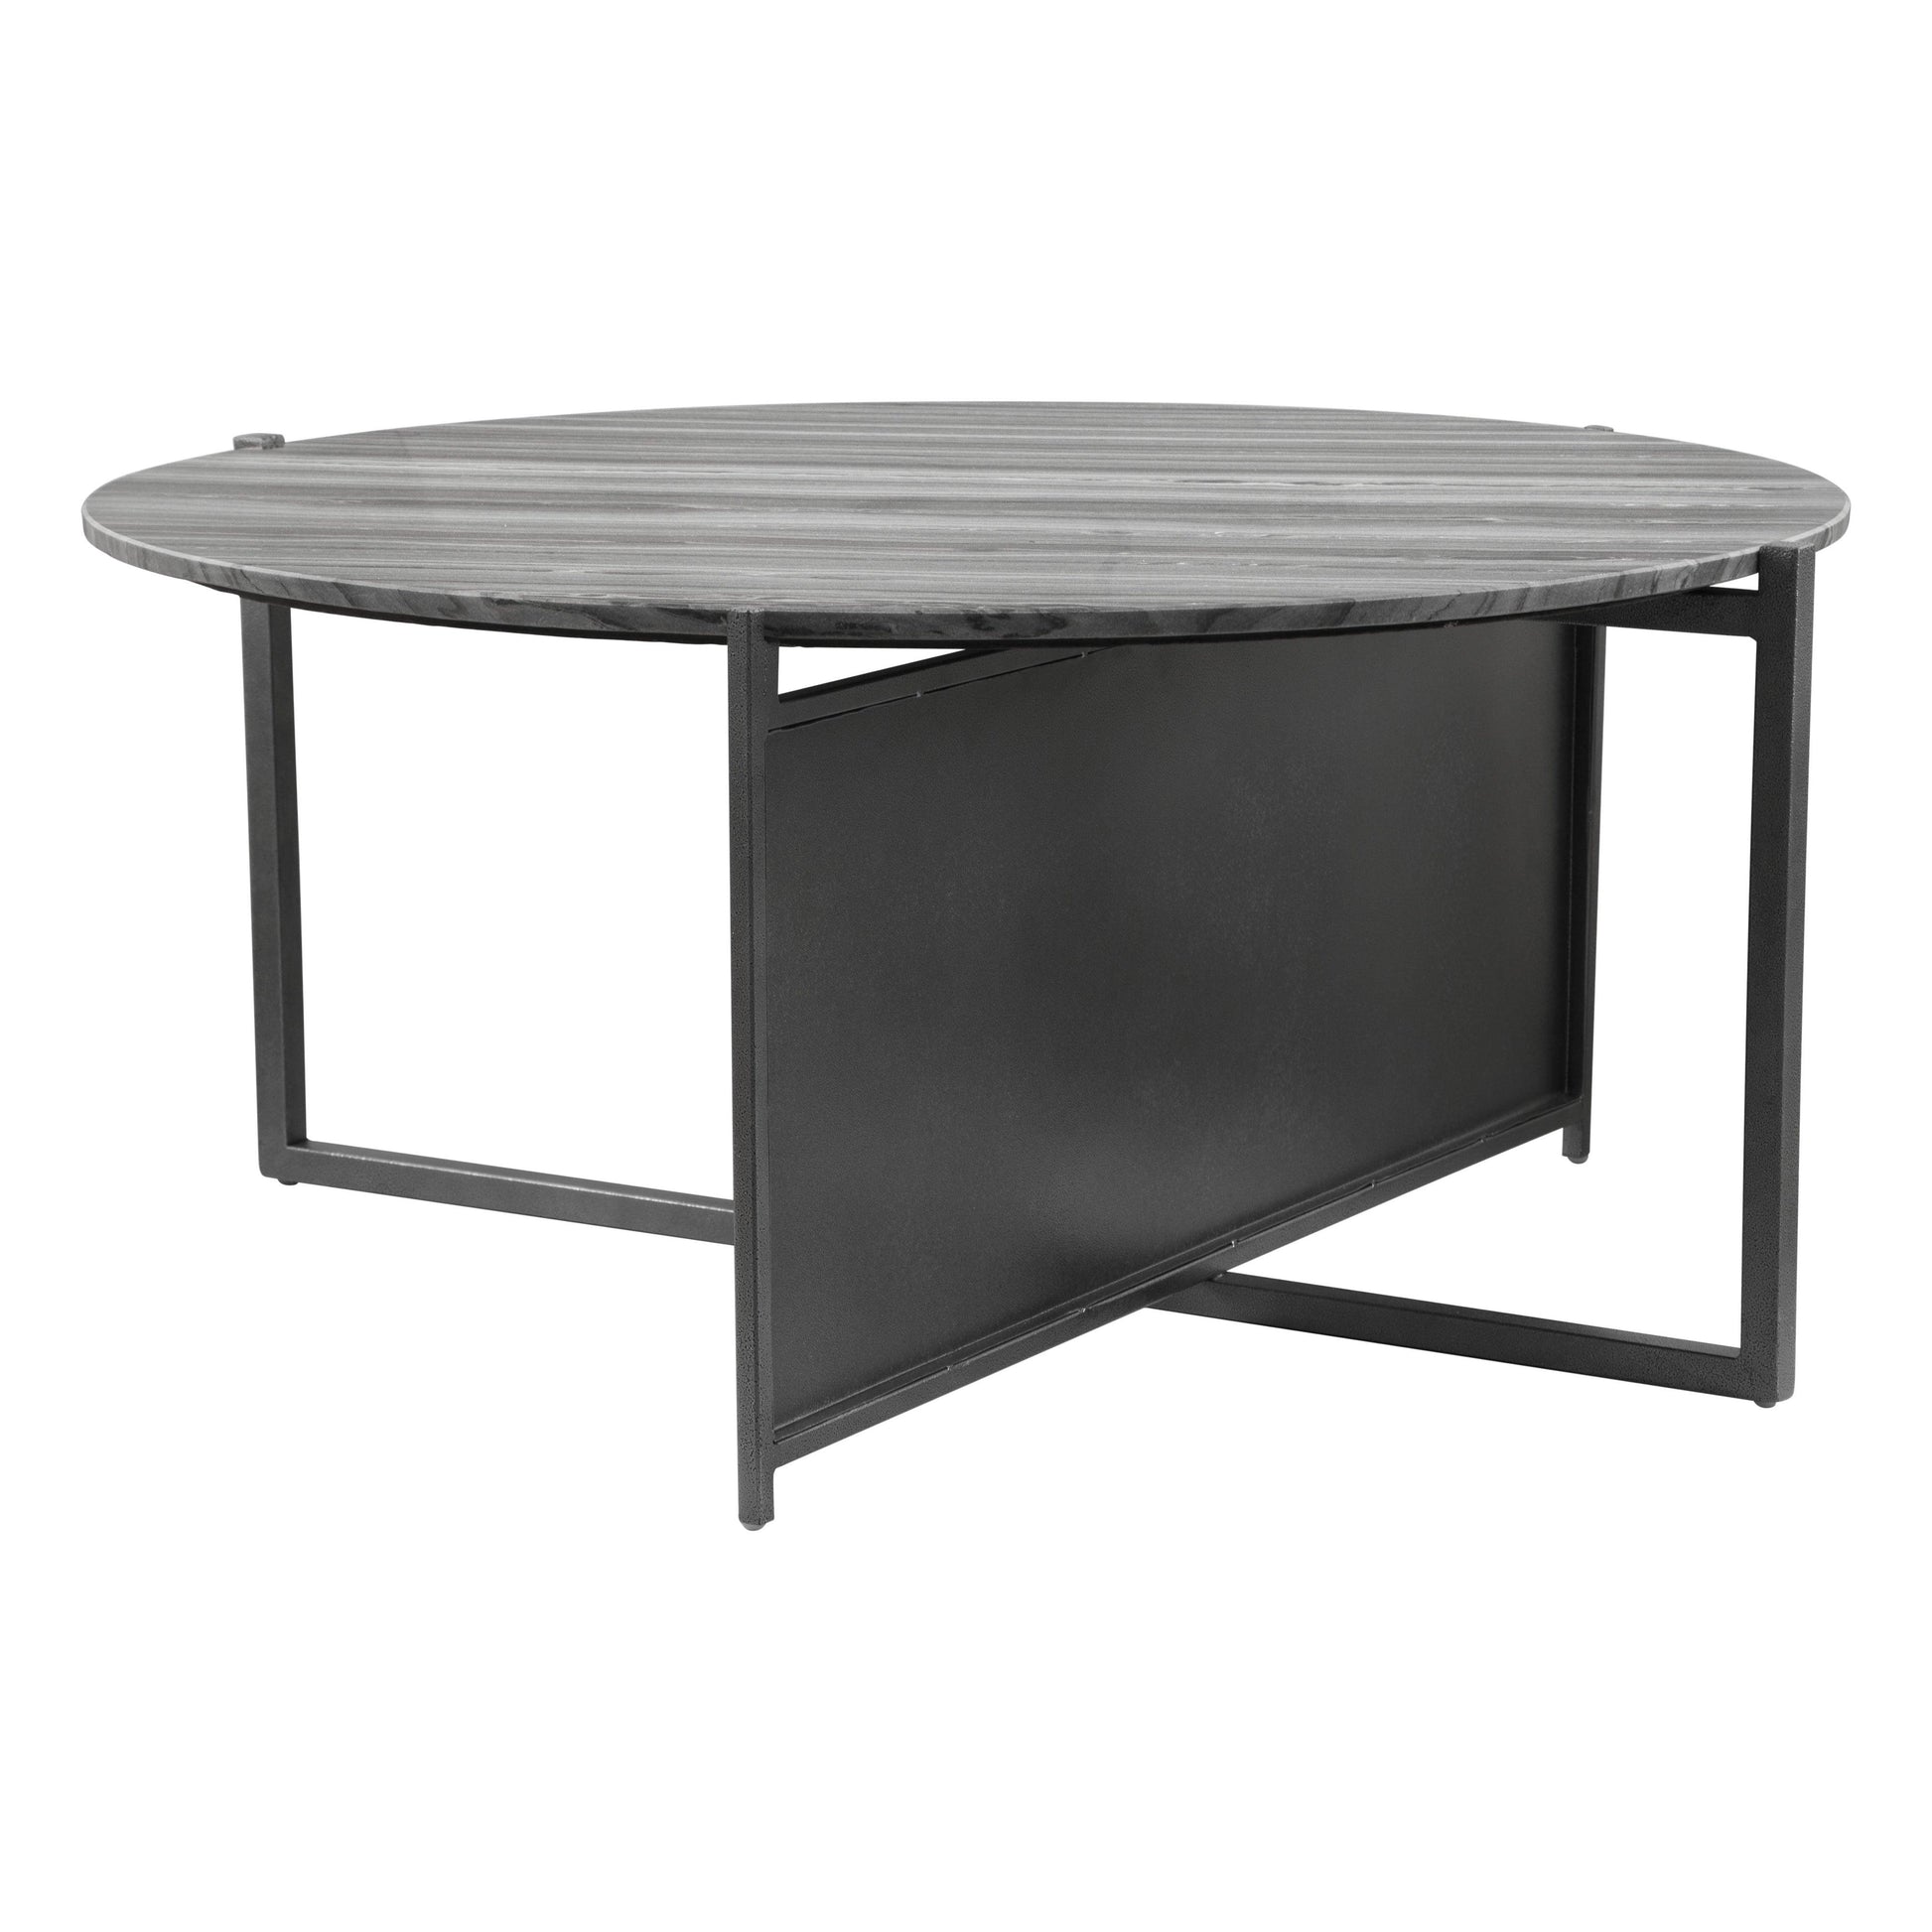 Mcbride Coffee Table Gray & Black - Sideboards and Things Accents_Black, Brand_Zuo Modern, Color_Black, Color_Gray, Depth_30-40, Finish_Hand Painted, Finish_Powder Coated, Height_10-20, Materials_Metal, Materials_Stone, Materials_Wood, Metal Type_Iron, Product Type_Coffee Table, Stone Type_Marble, Width_30-40, Wood Species_MDF